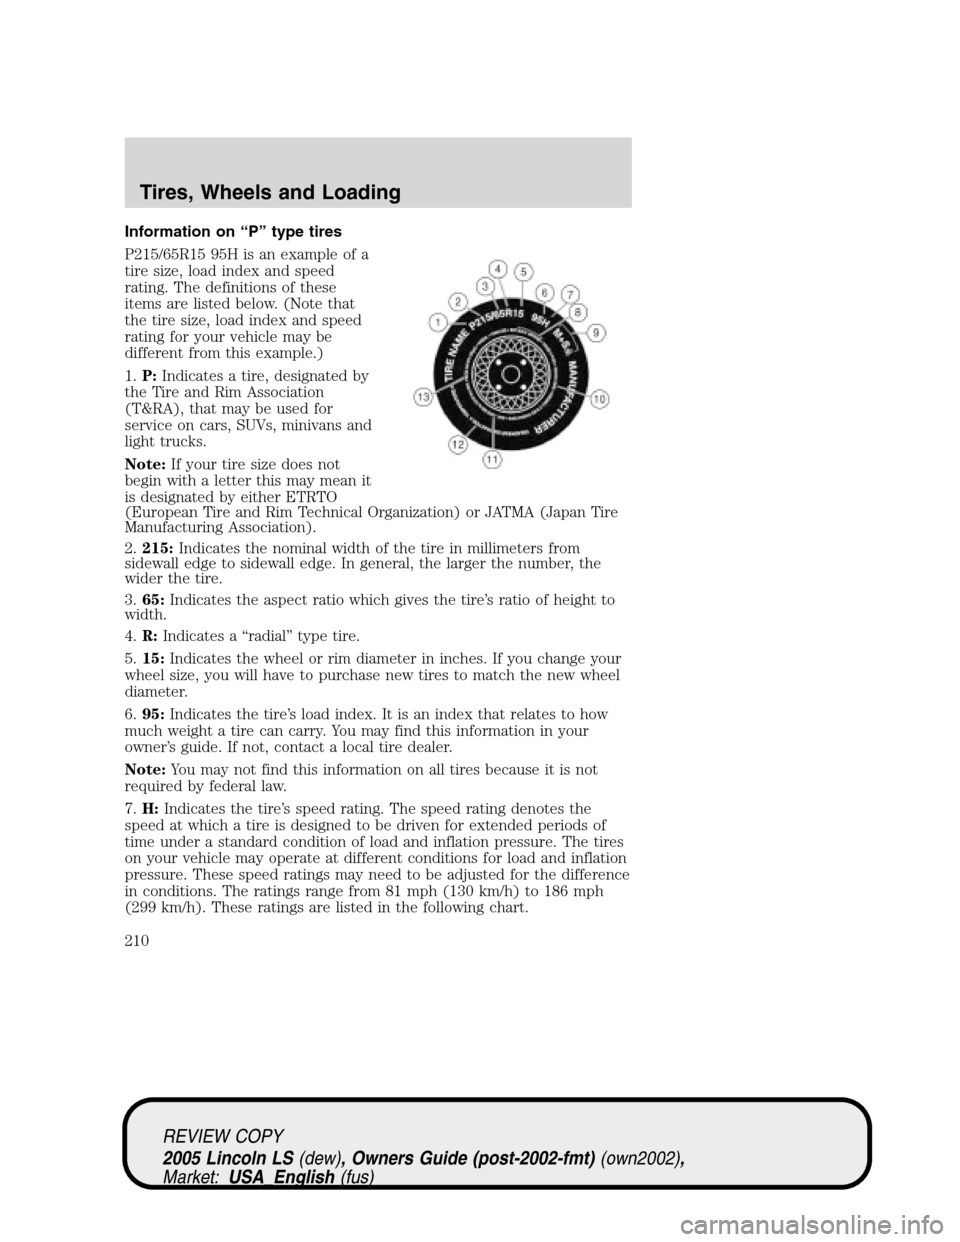 LINCOLN LS 2005  Owners Manual Information on“P”type tires
P215/65R15 95H is an example of a
tire size, load index and speed
rating. The definitions of these
items are listed below. (Note that
the tire size, load index and spee